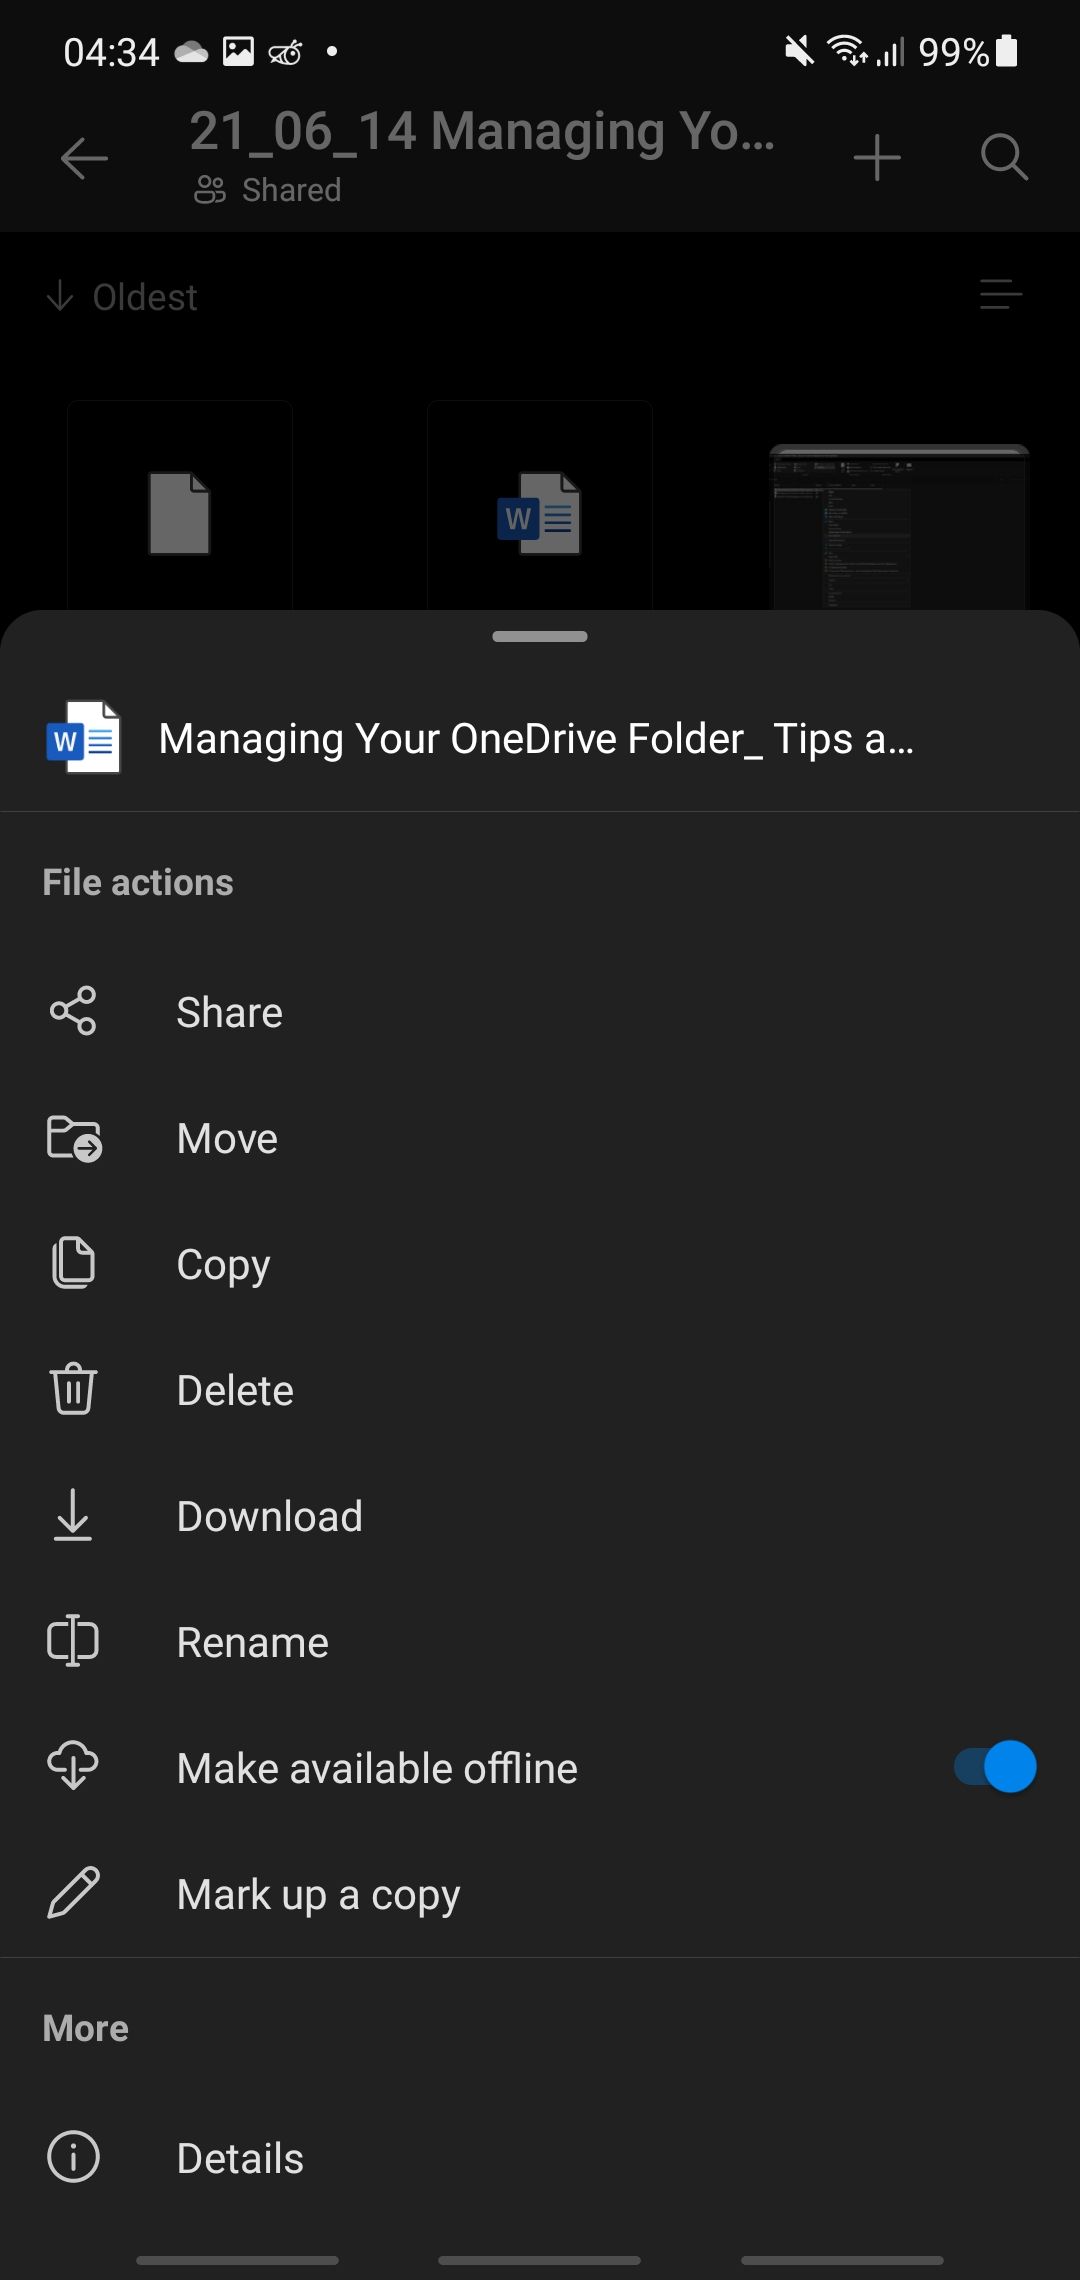 OneDrive file made available offline on Android